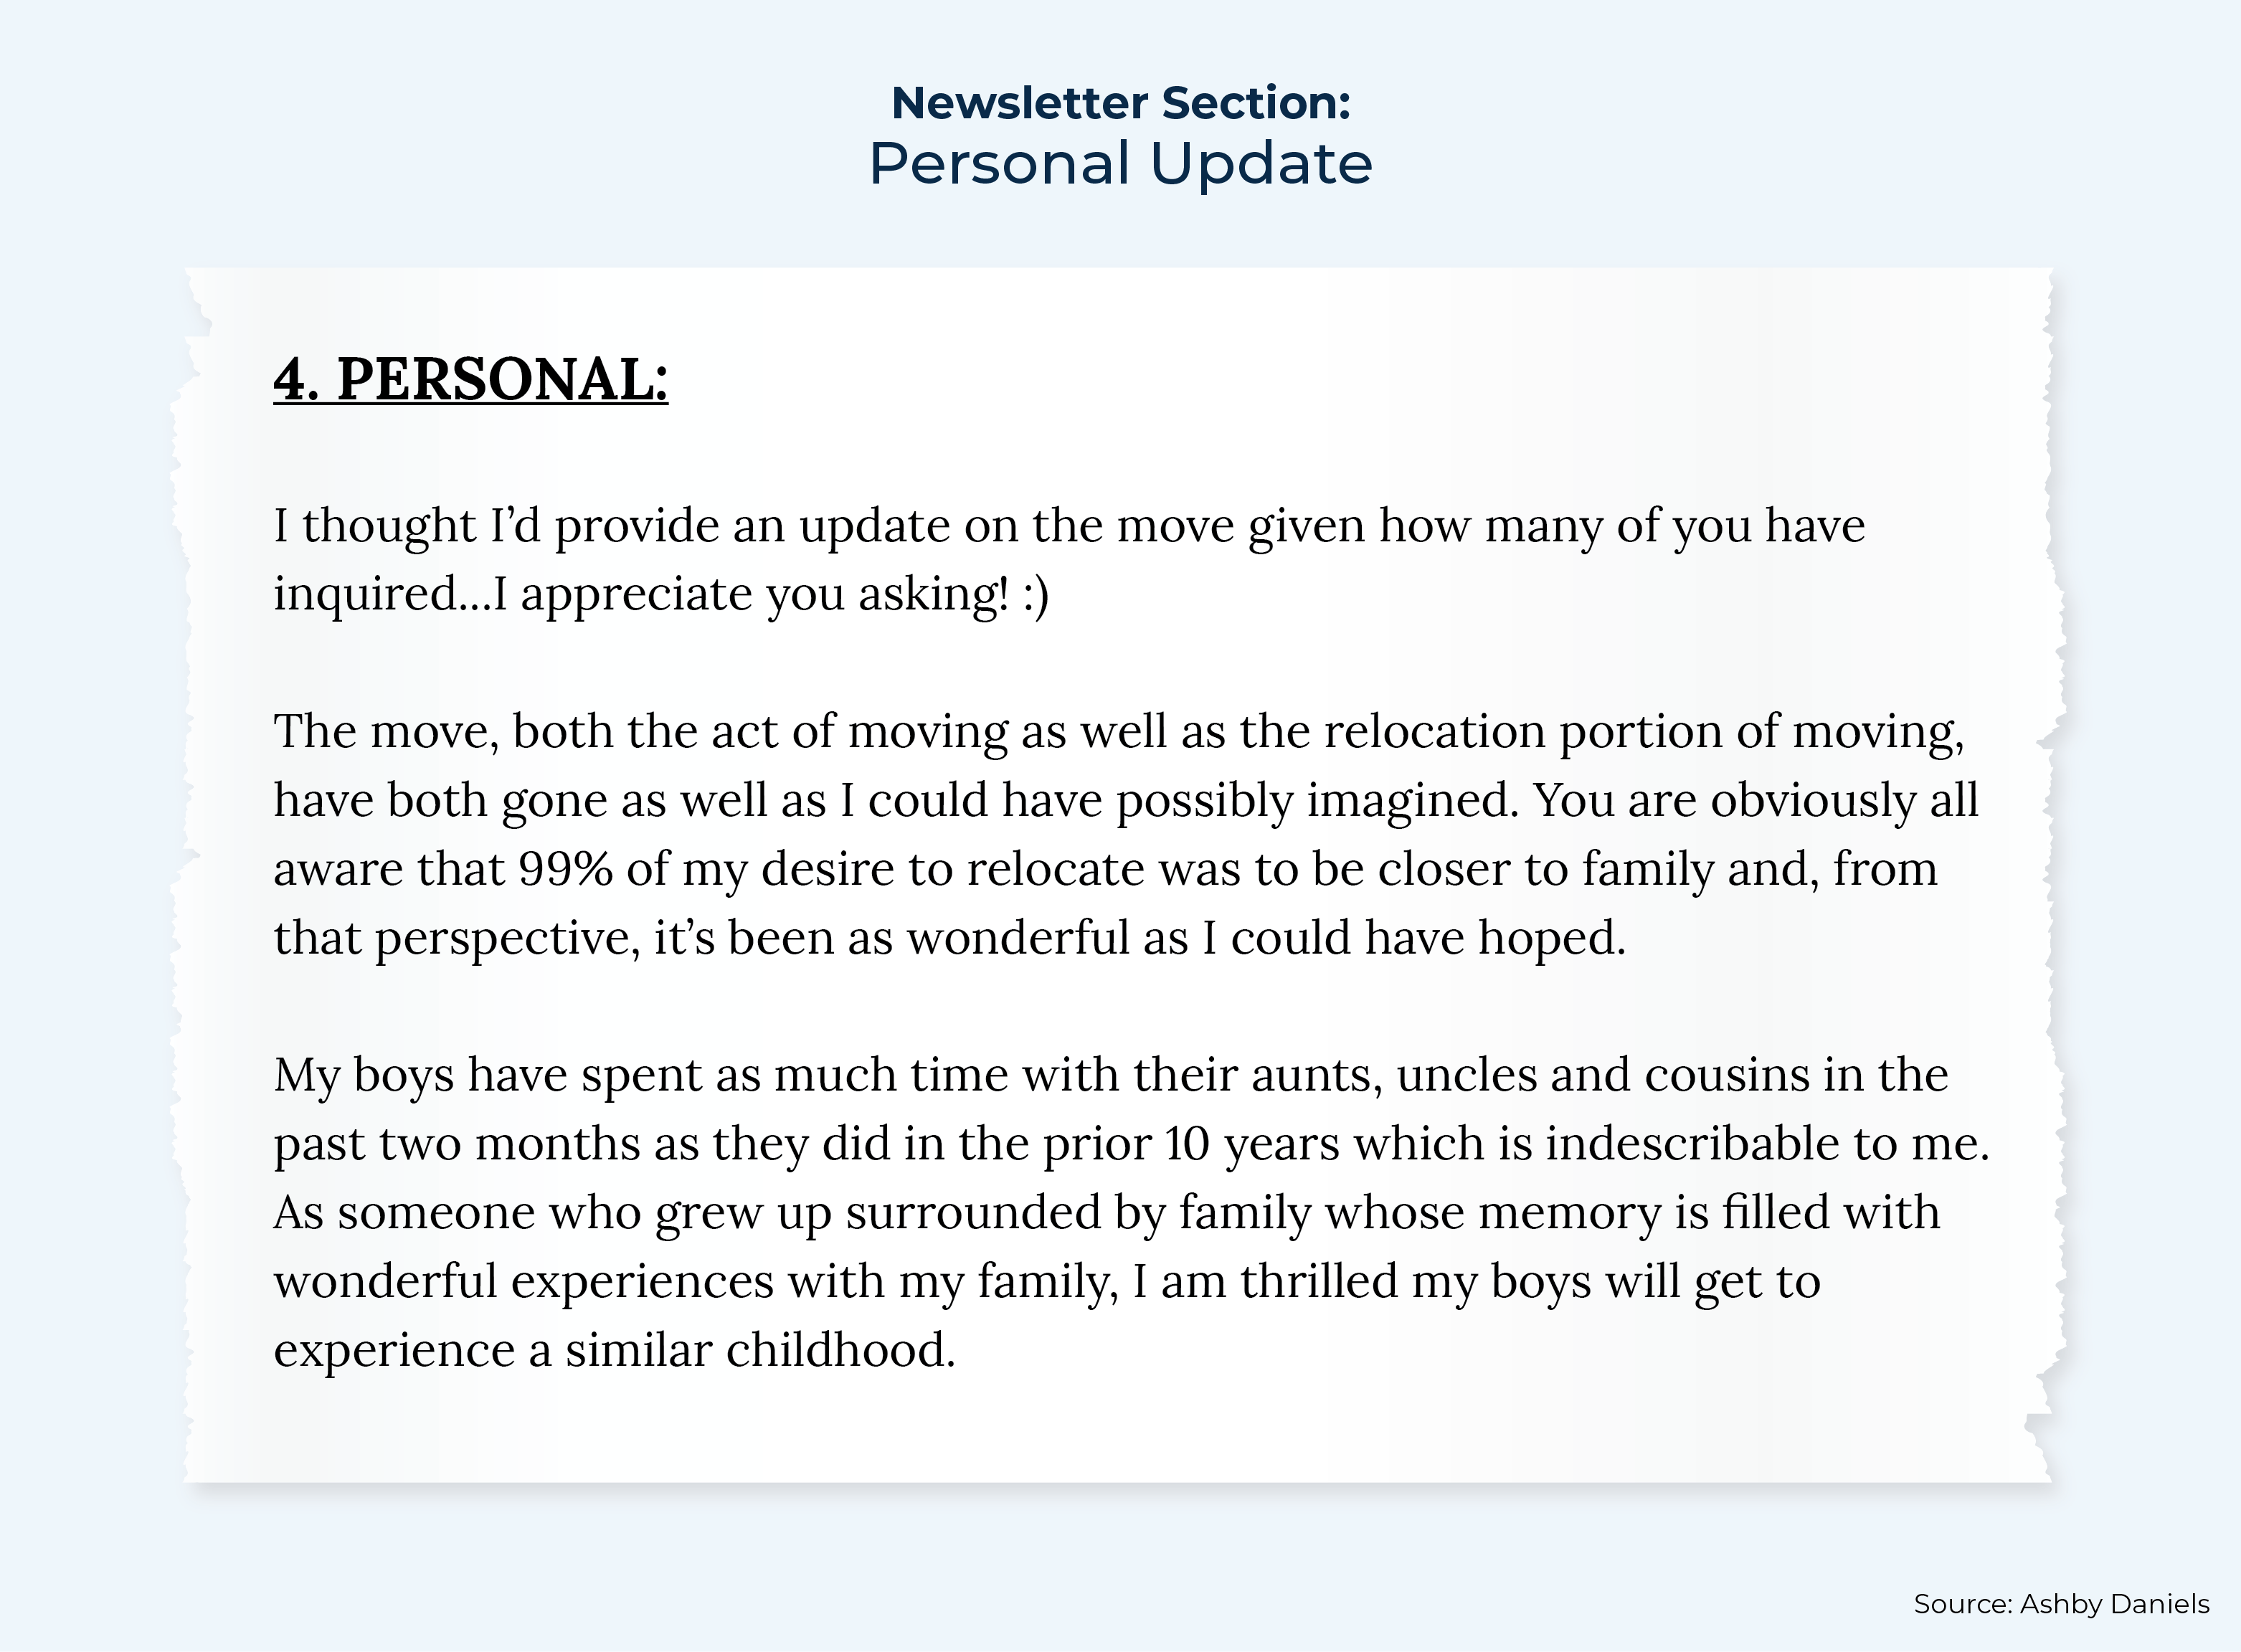 Newsletter Section Personal Update